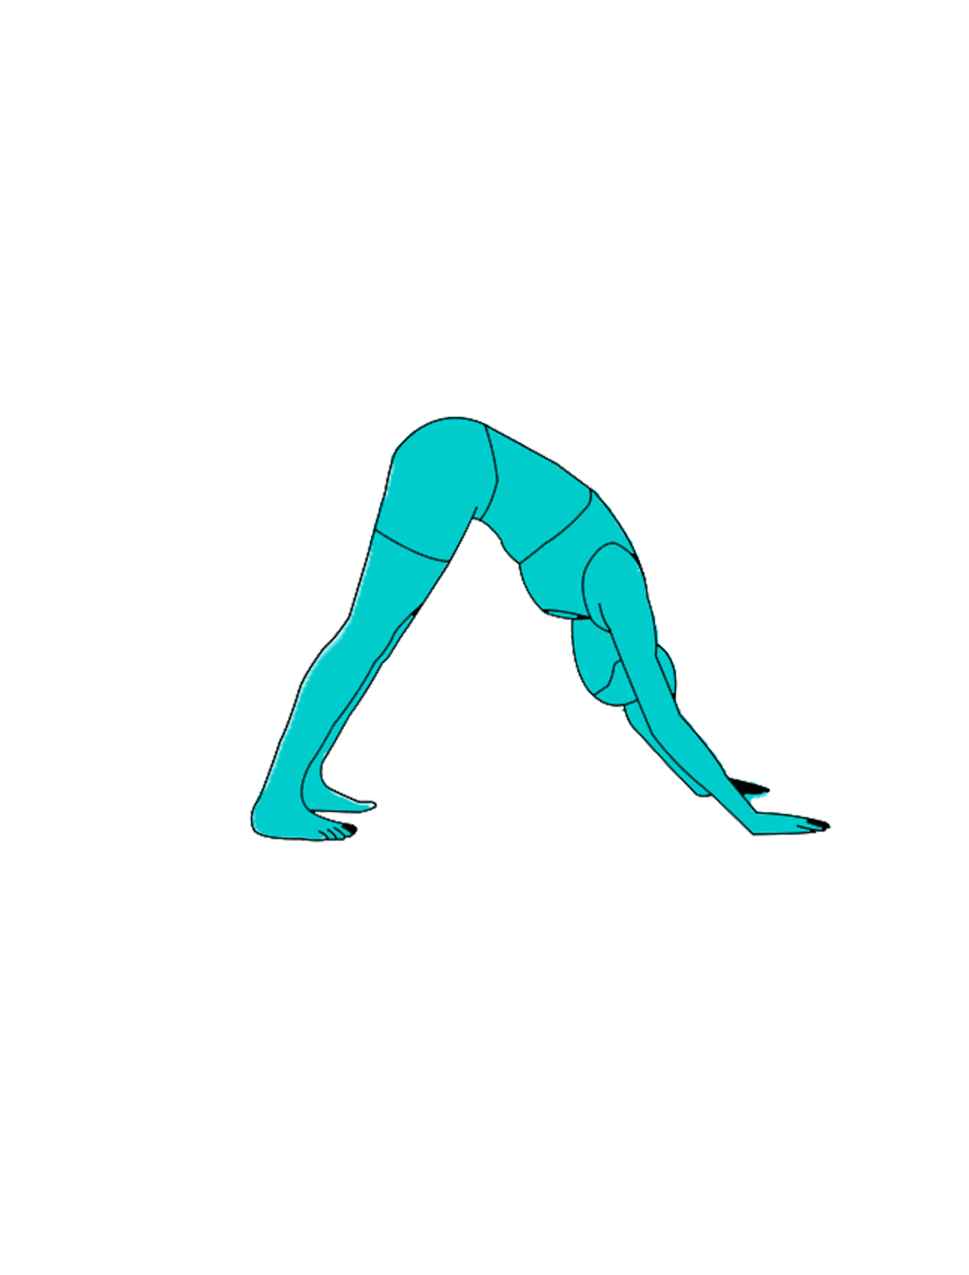 How to Downward Dog Properly: Correct Form, Mistakes, and Variations - A Step-By-Step Guide - Boardgains